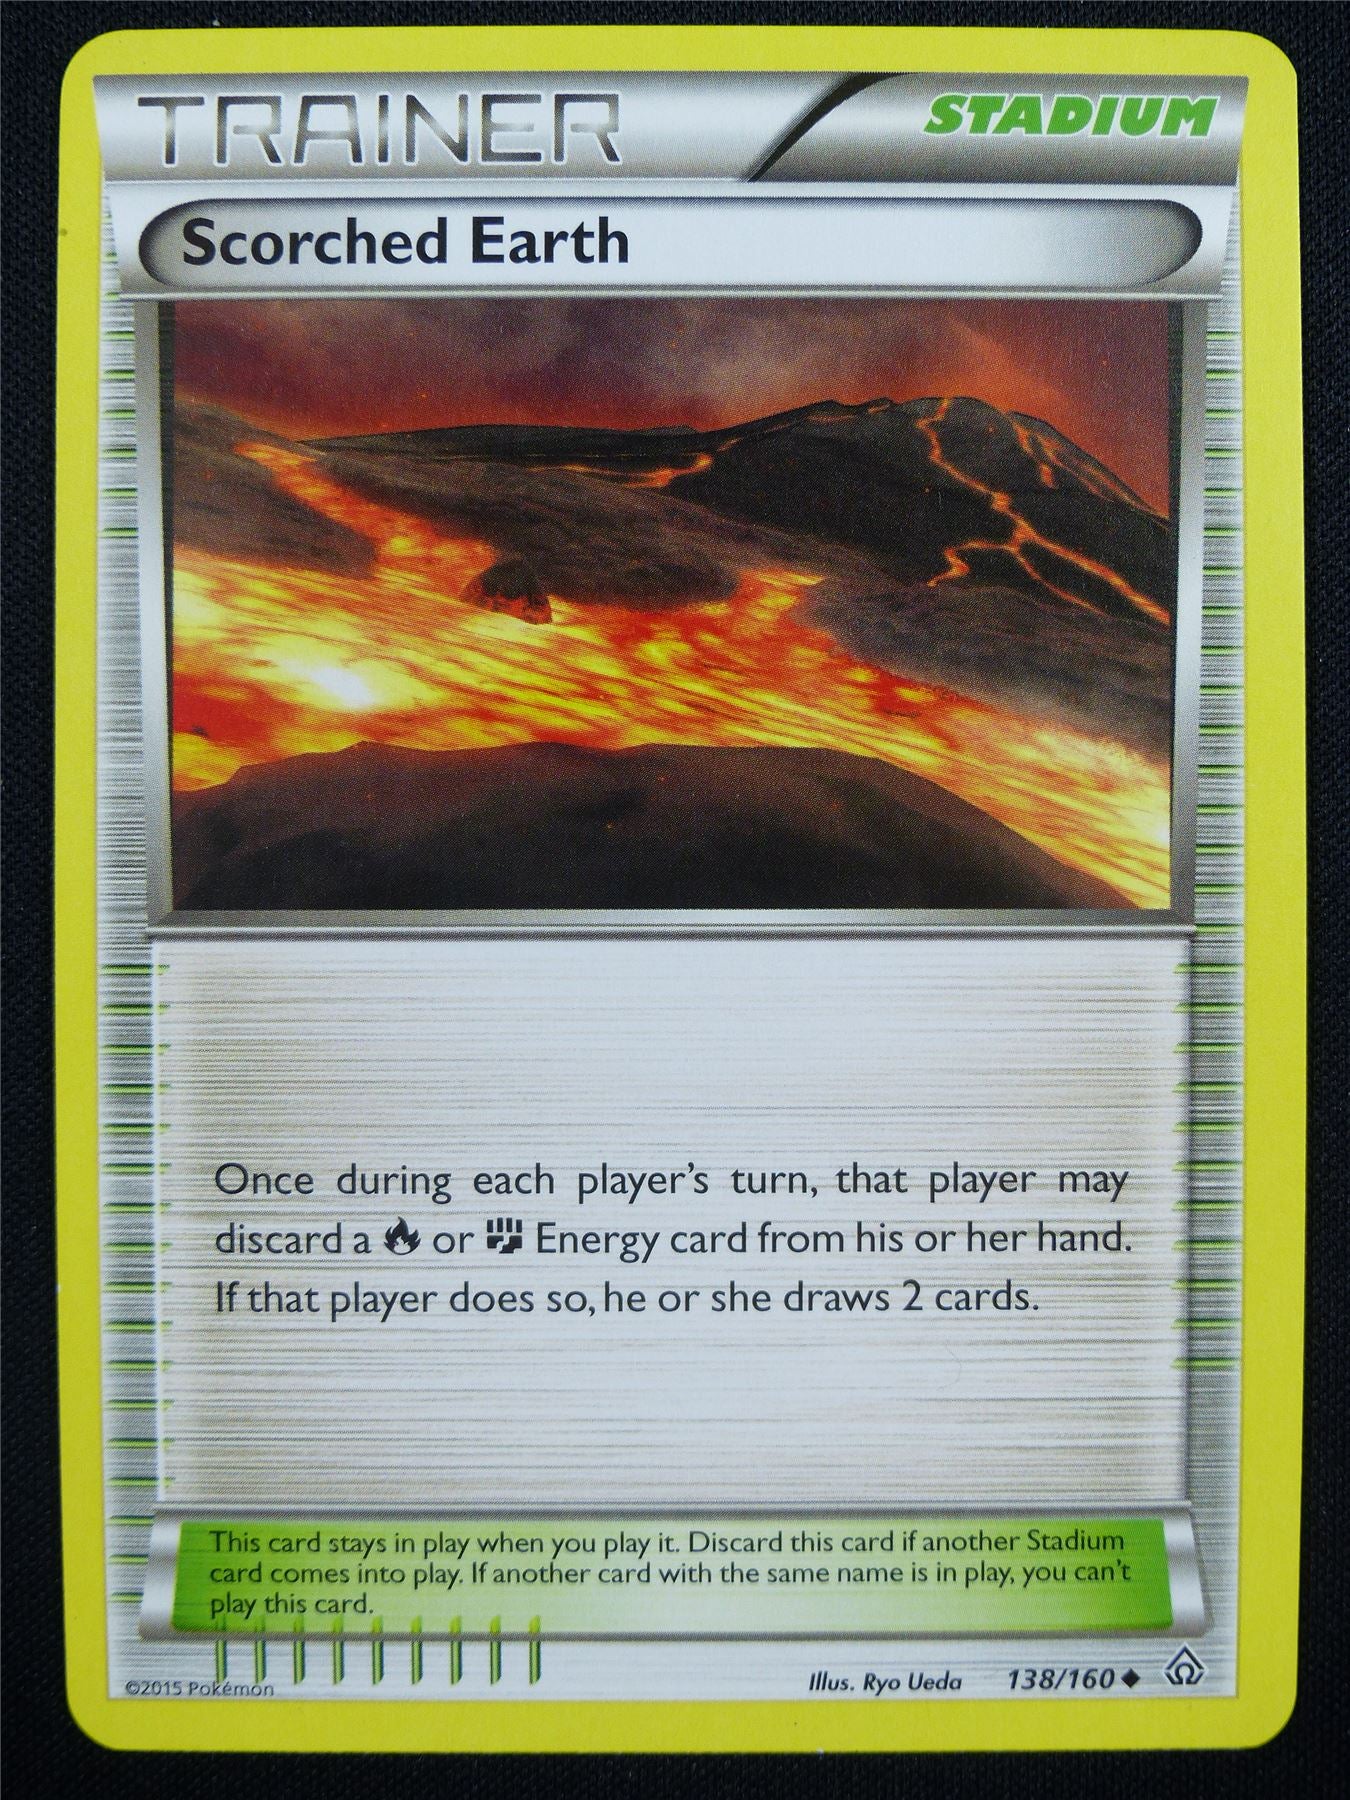 Scorched Earth 138/160 - Pokemon Card #10I